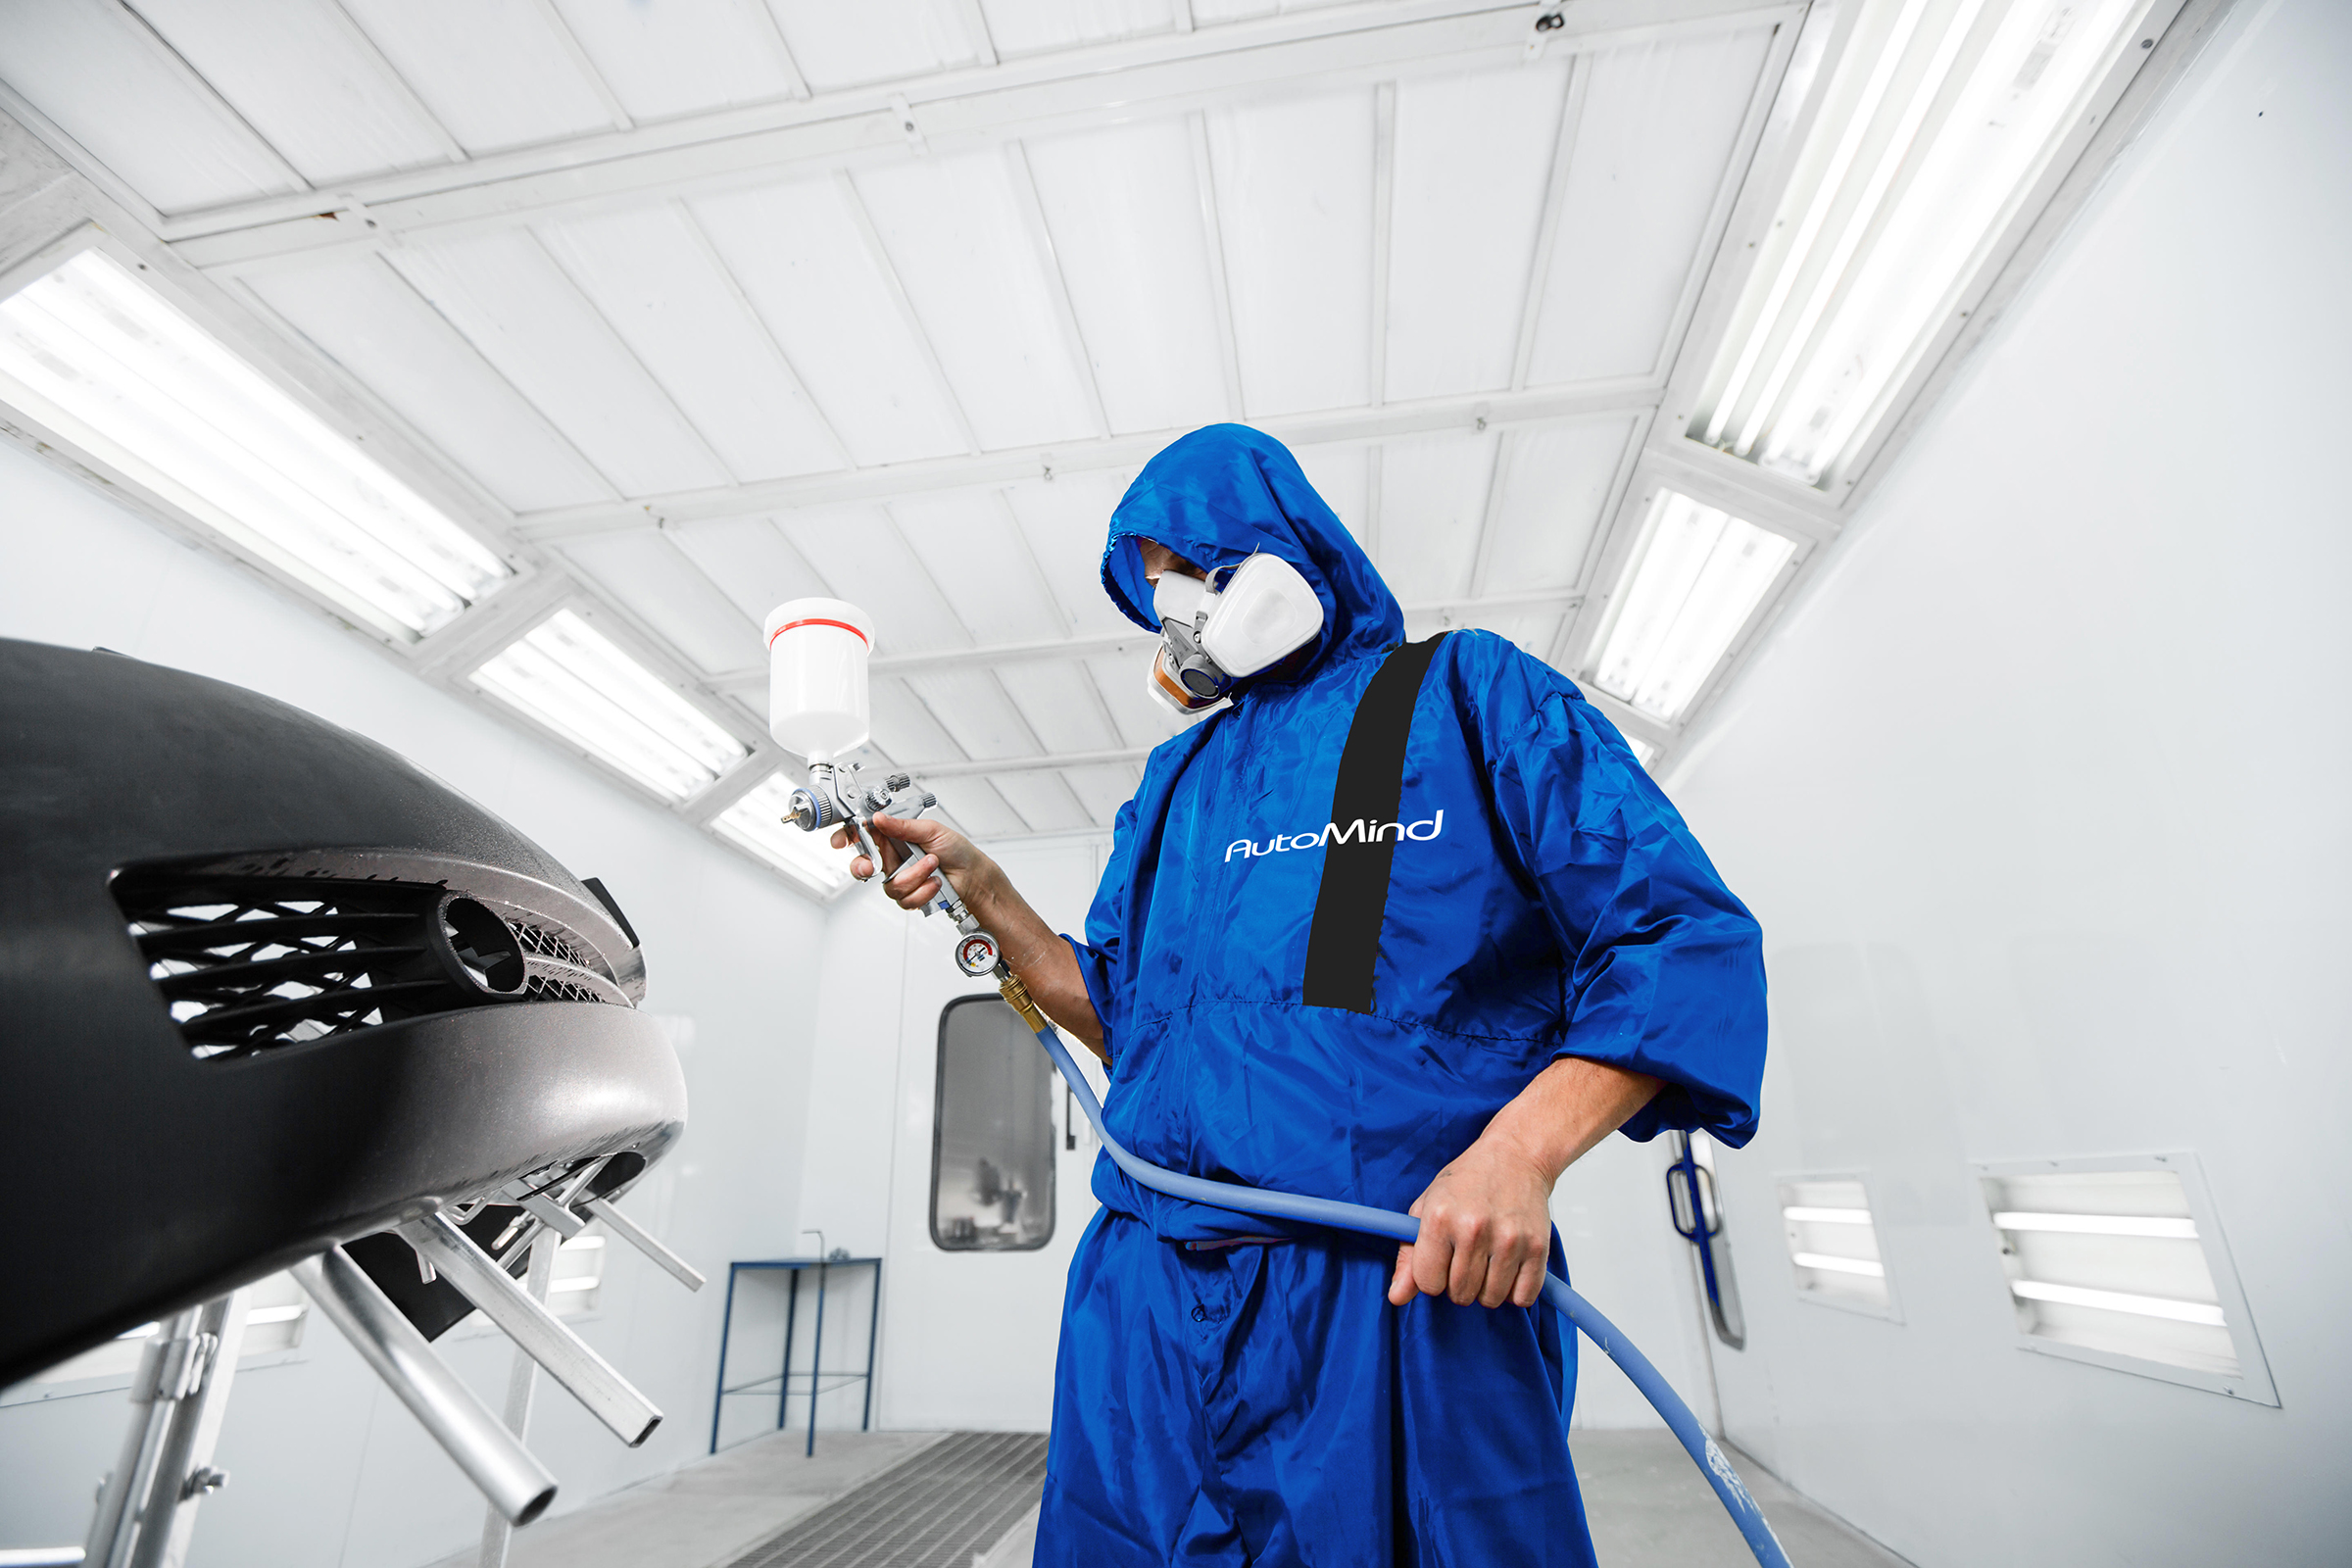 H5J7X8 worker painting a car black blank parts in special garage, wearing costume and protective gear